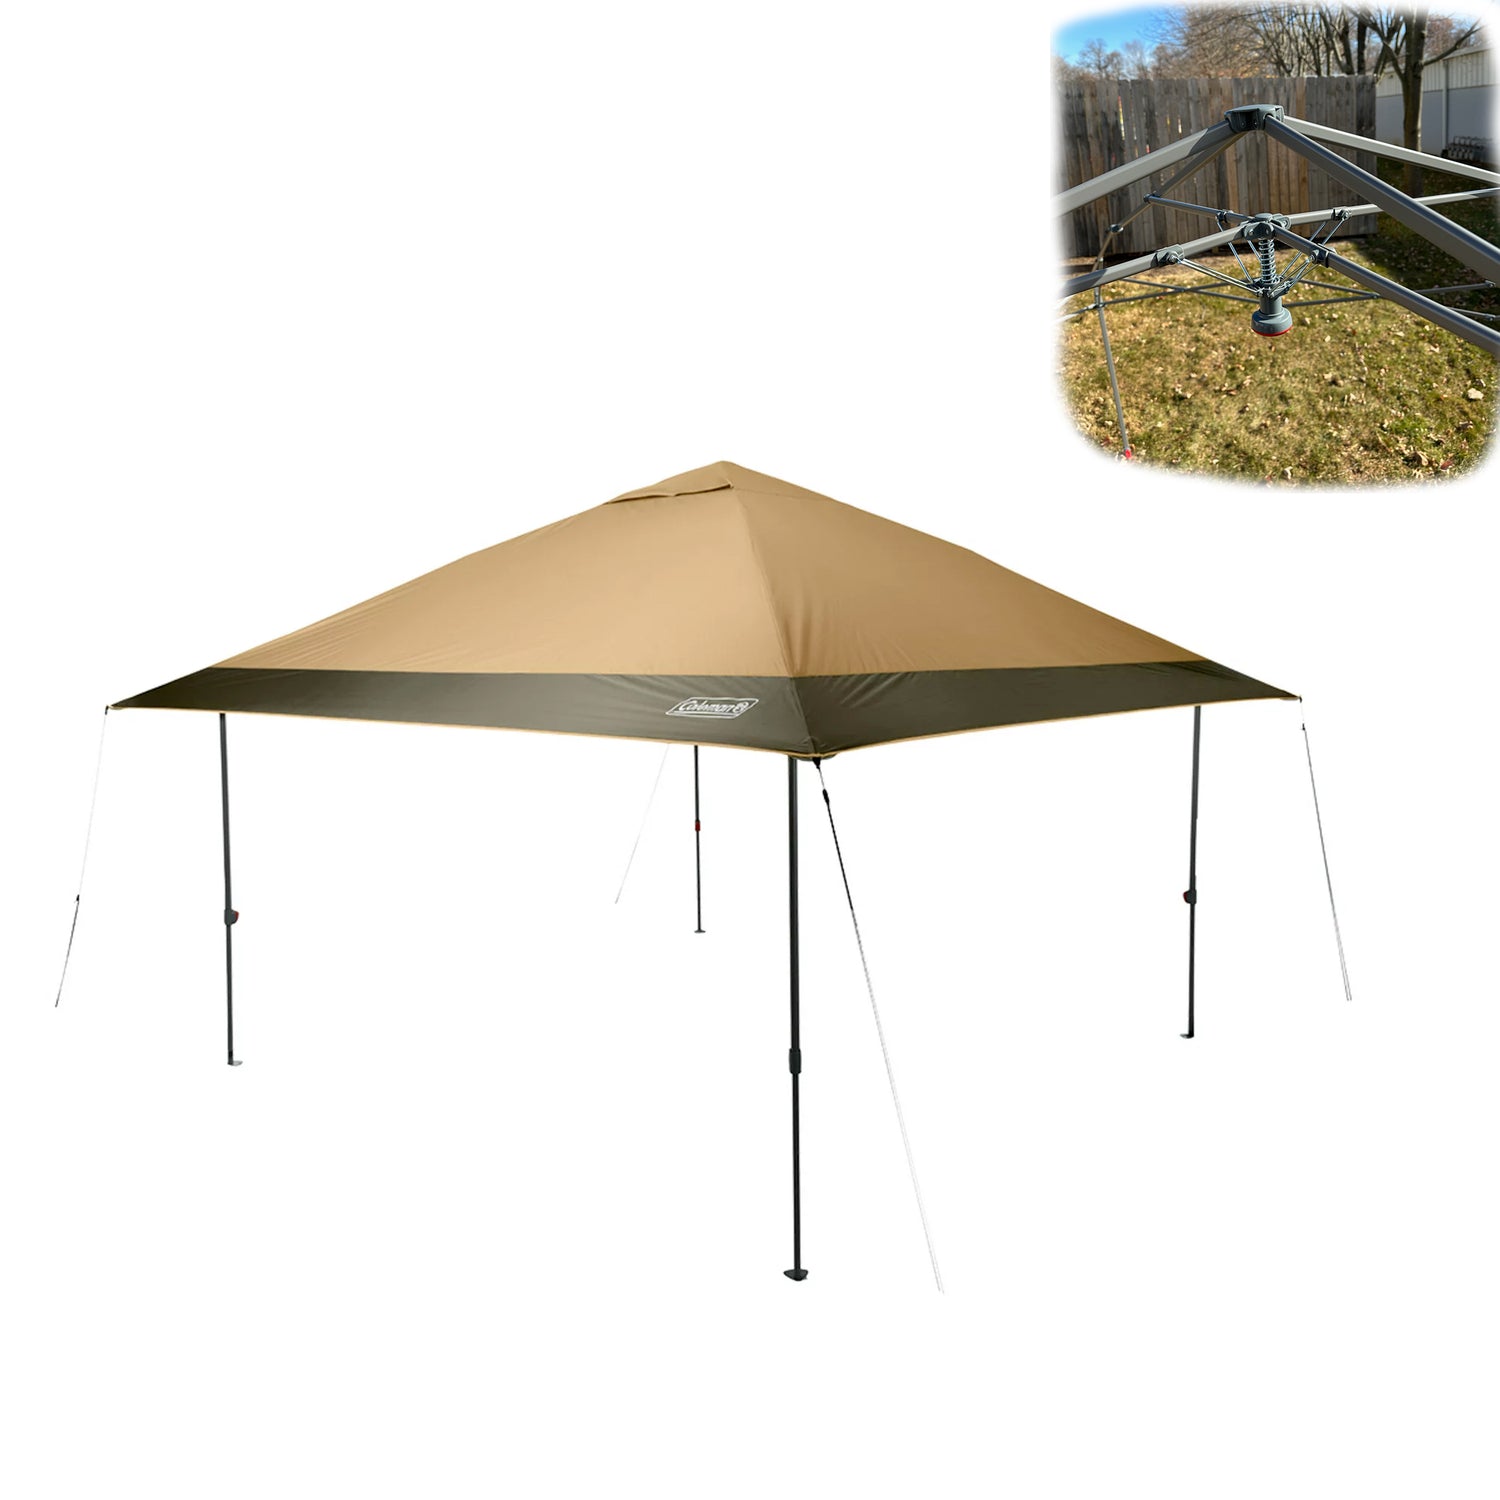 Coleman 13'x13' Oasis 1-Push Center Hub Shelter from Costco